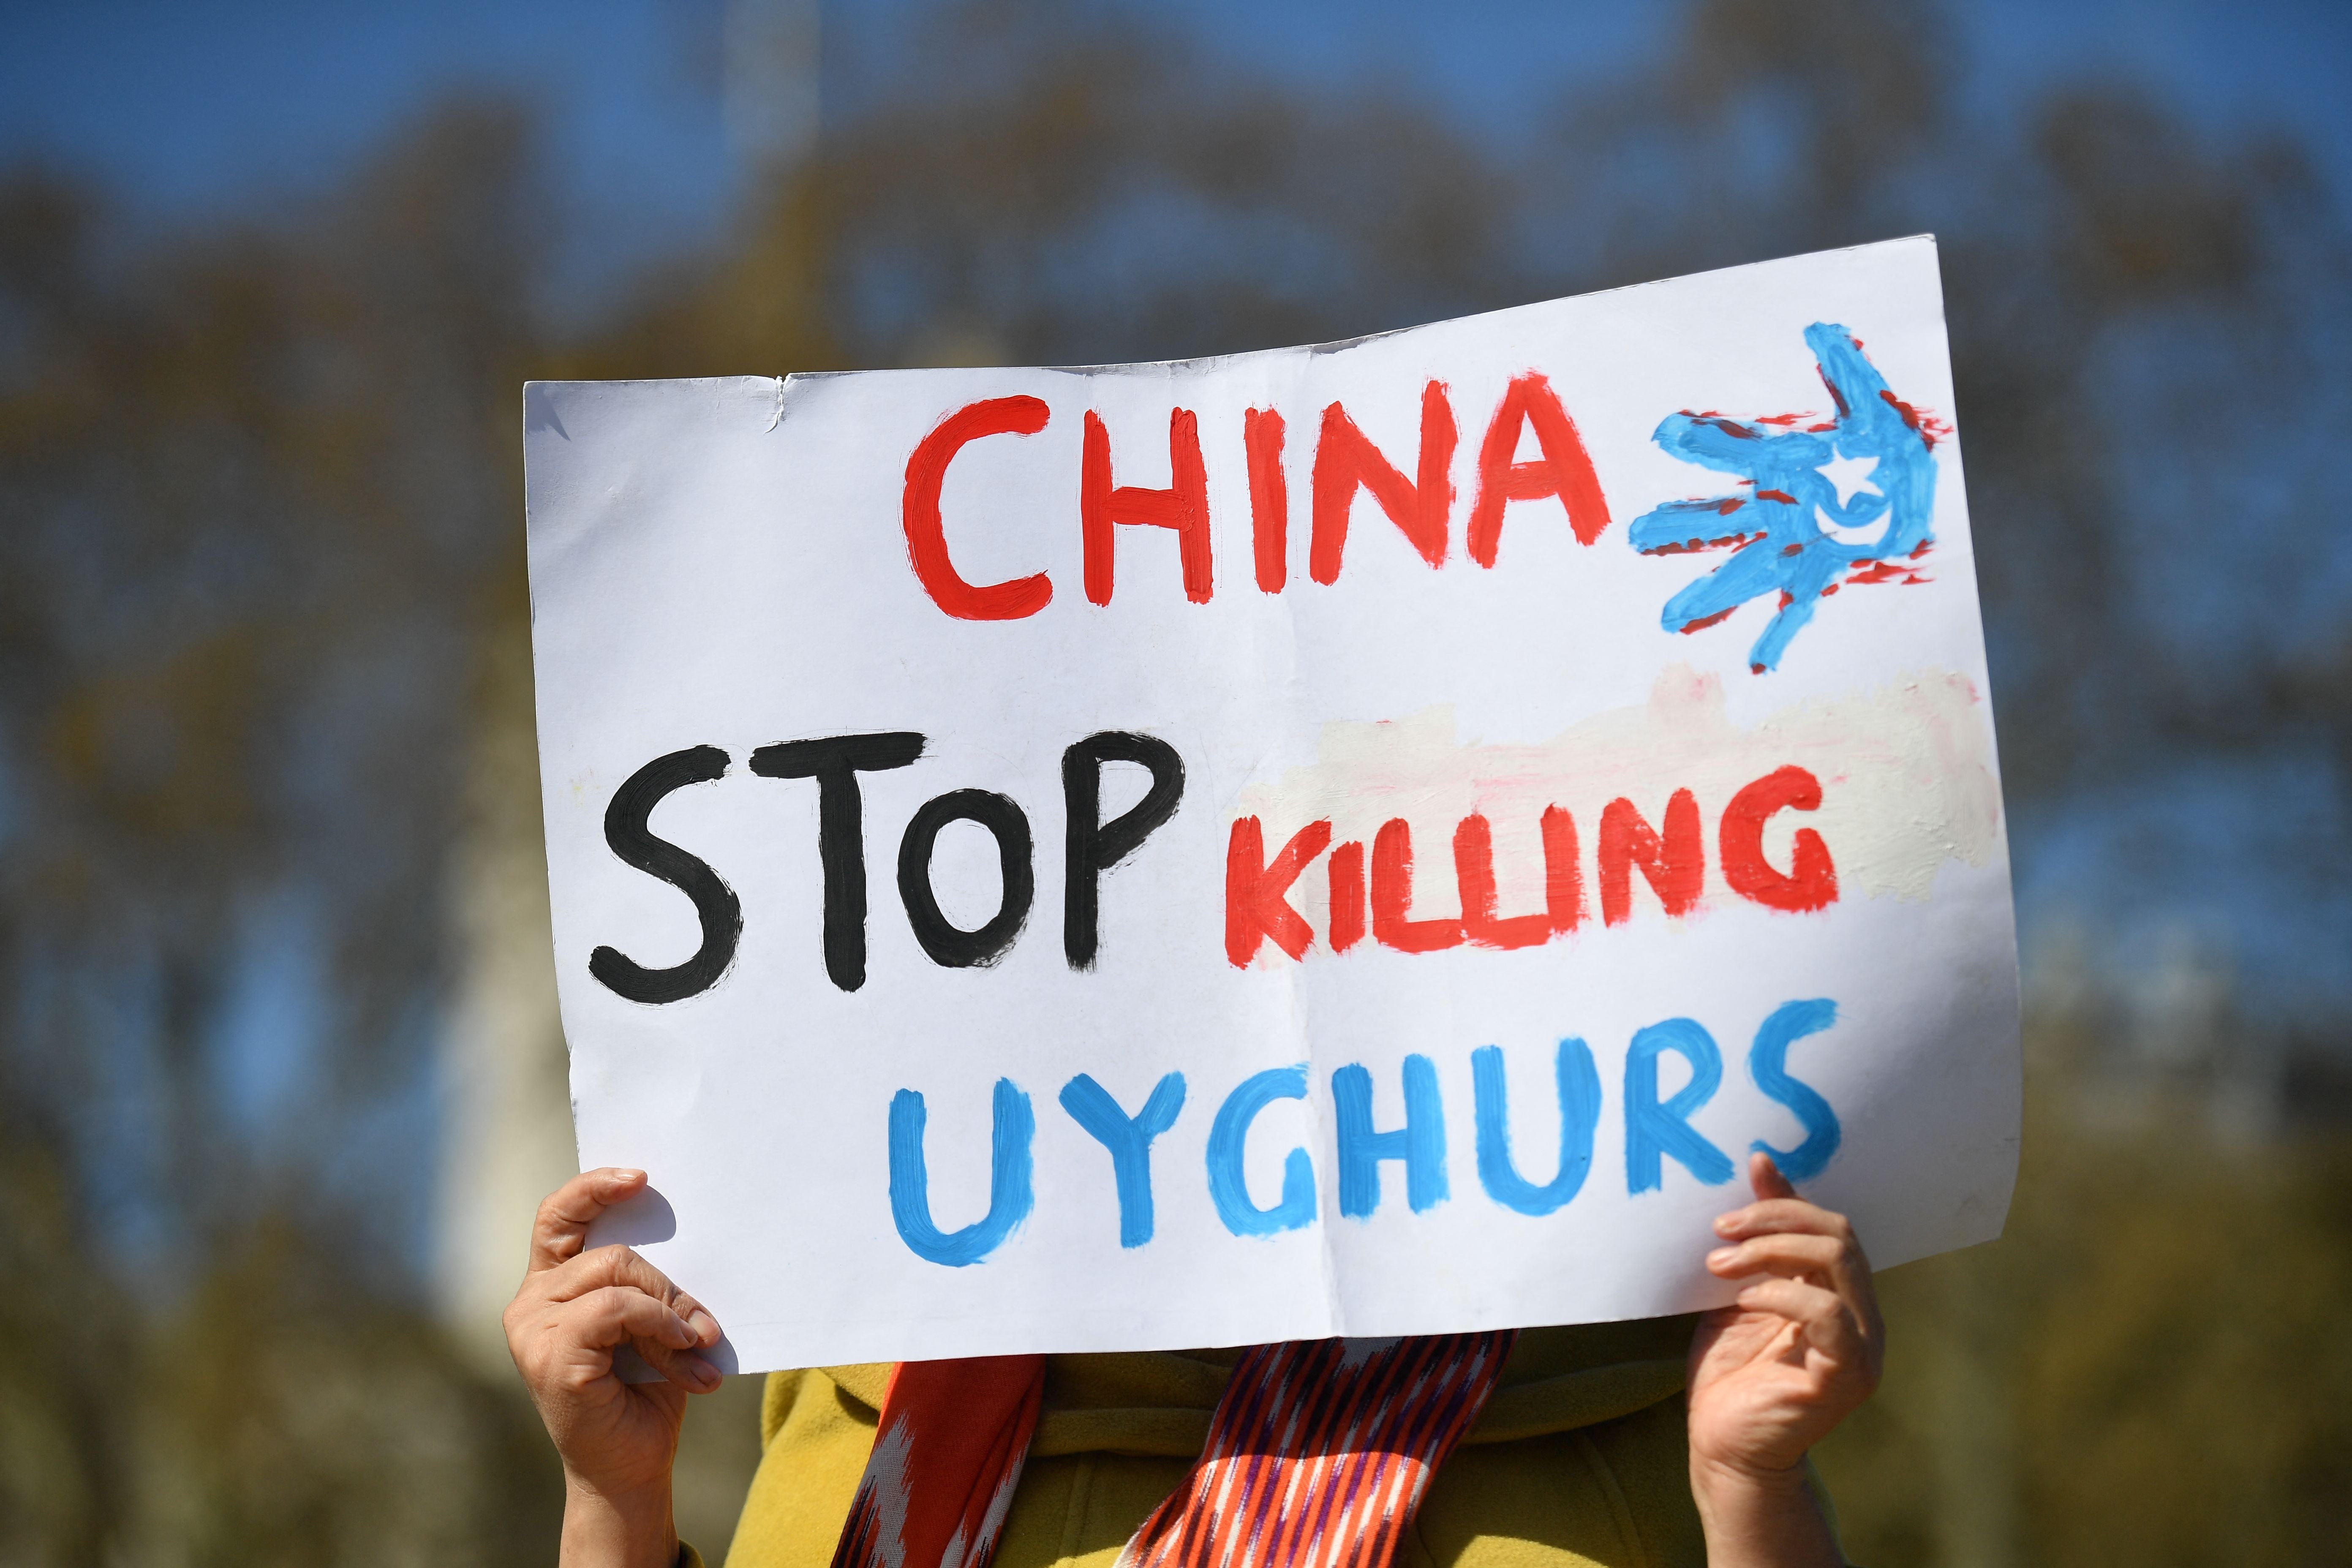 A protester demonstrates against the alleged persecution of China’s Uyghur Muslim minority